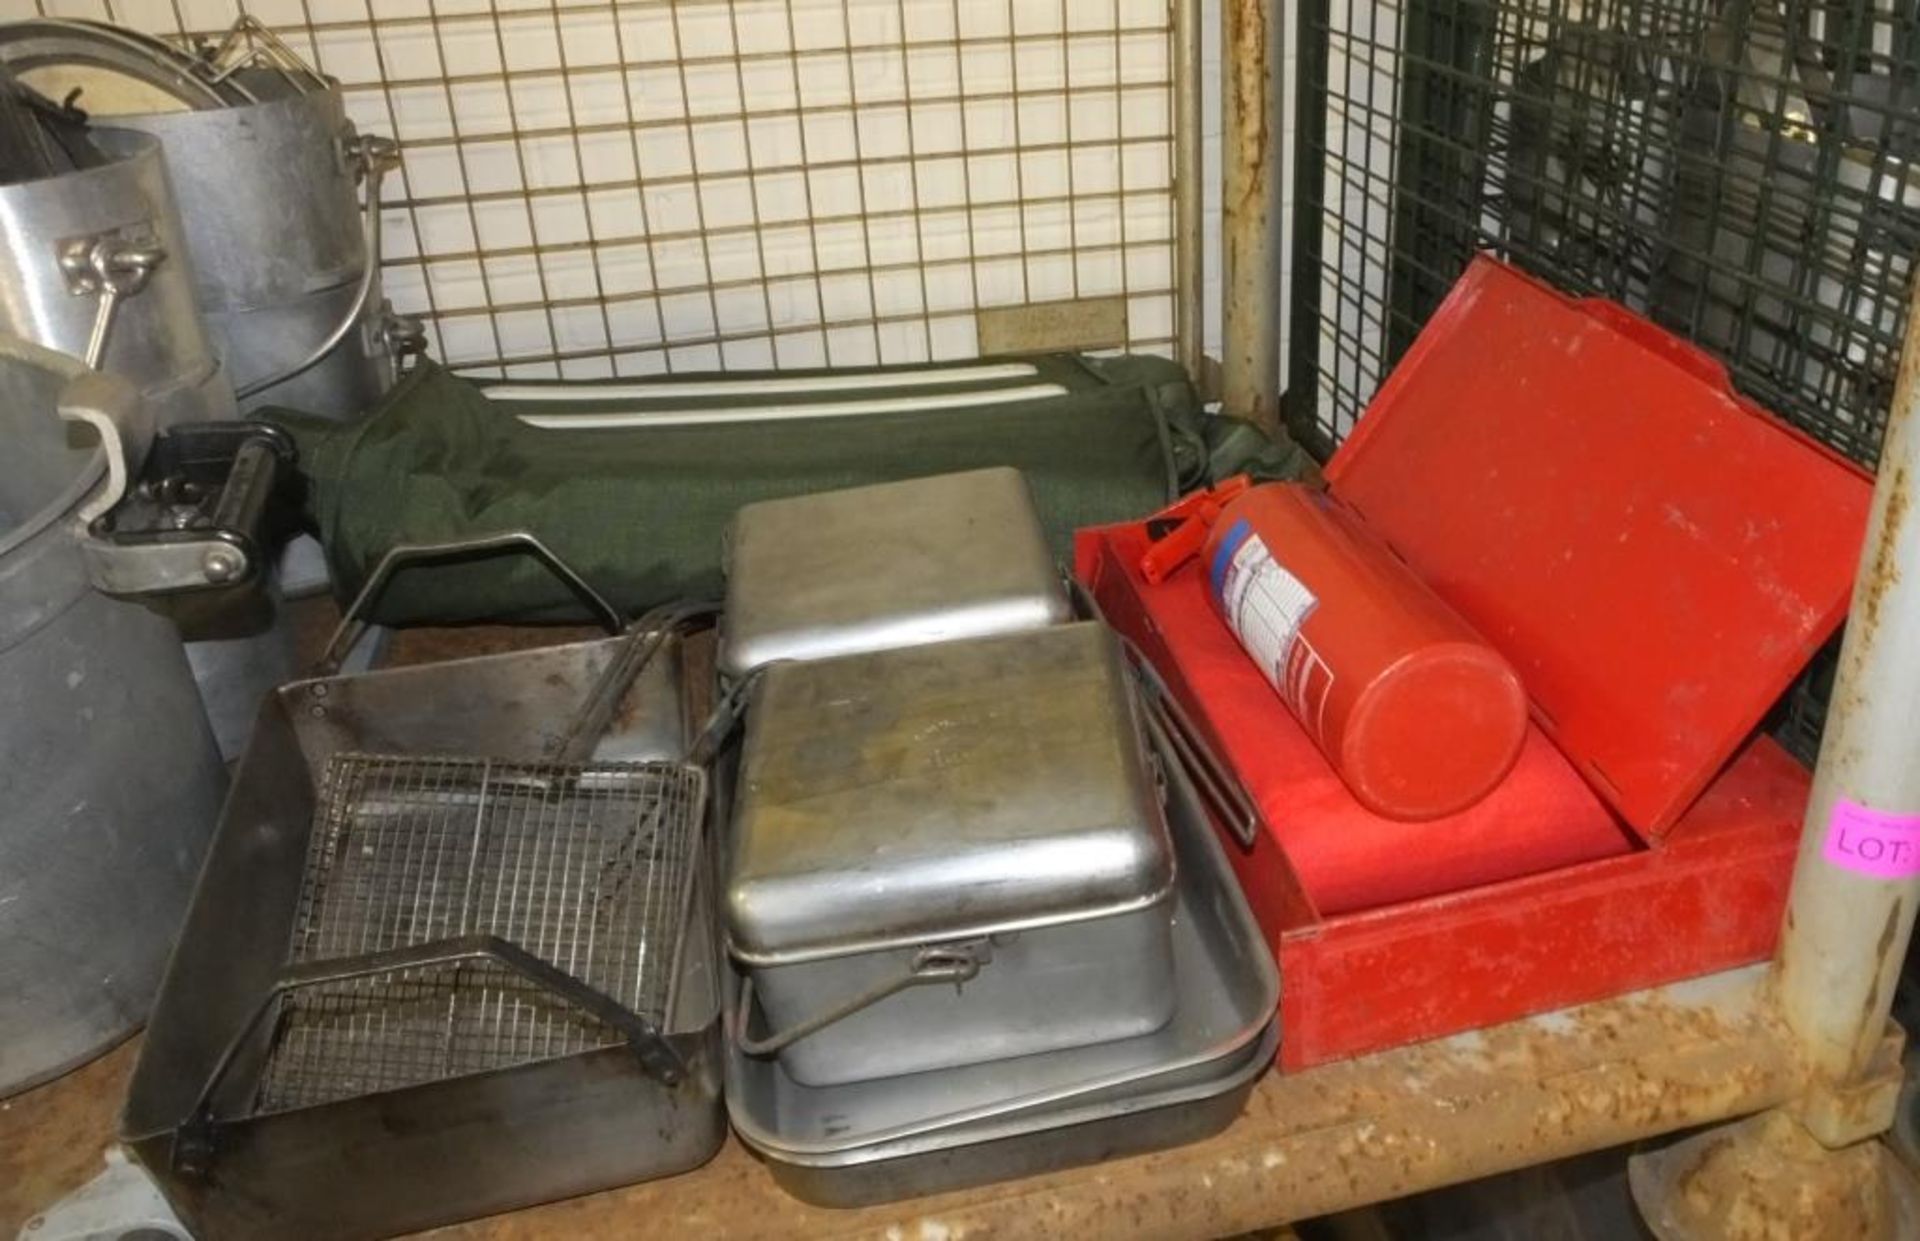 Field Kitchen set - cooker, oven, utensil set in carry box, norweigen food boxes - Image 3 of 5